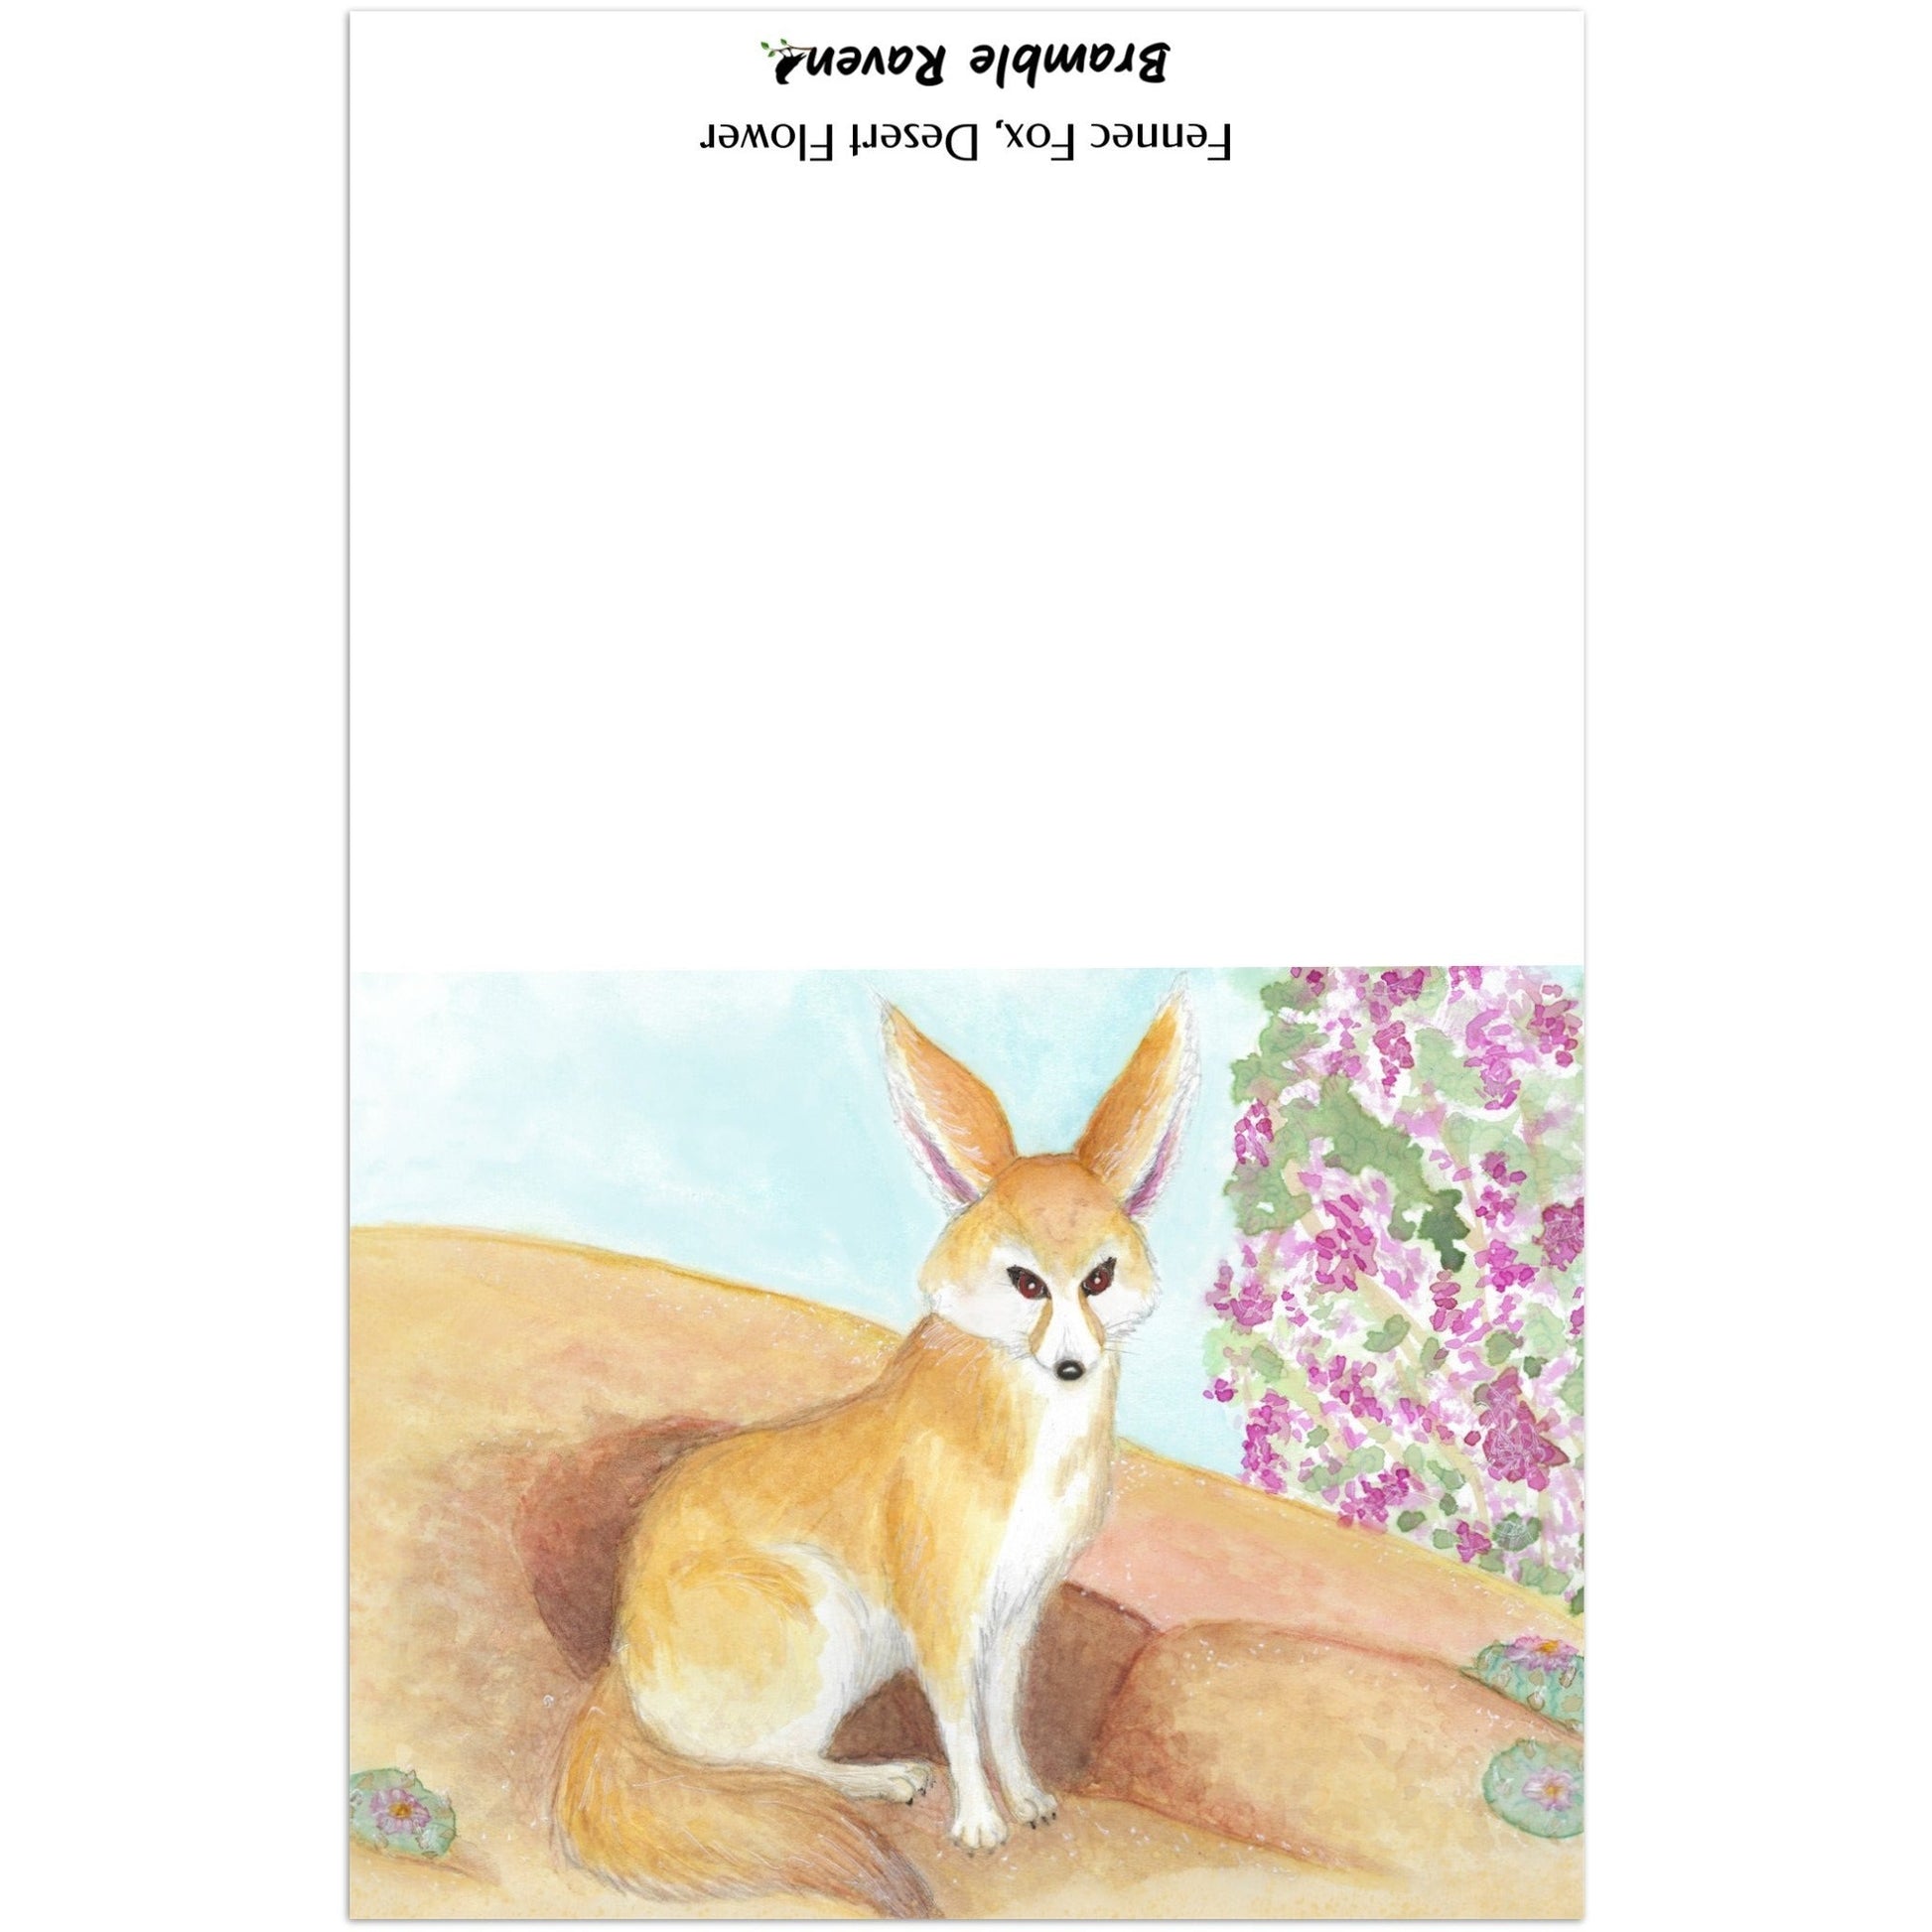 Pack of ten 4.25 x 5.5 inch greeting cards. Features watercolor print of fennec fox near it's den in the desert by a jacaranda tree on the front. Inside is blank. Made of coated paperboard. Comes with envelopes.